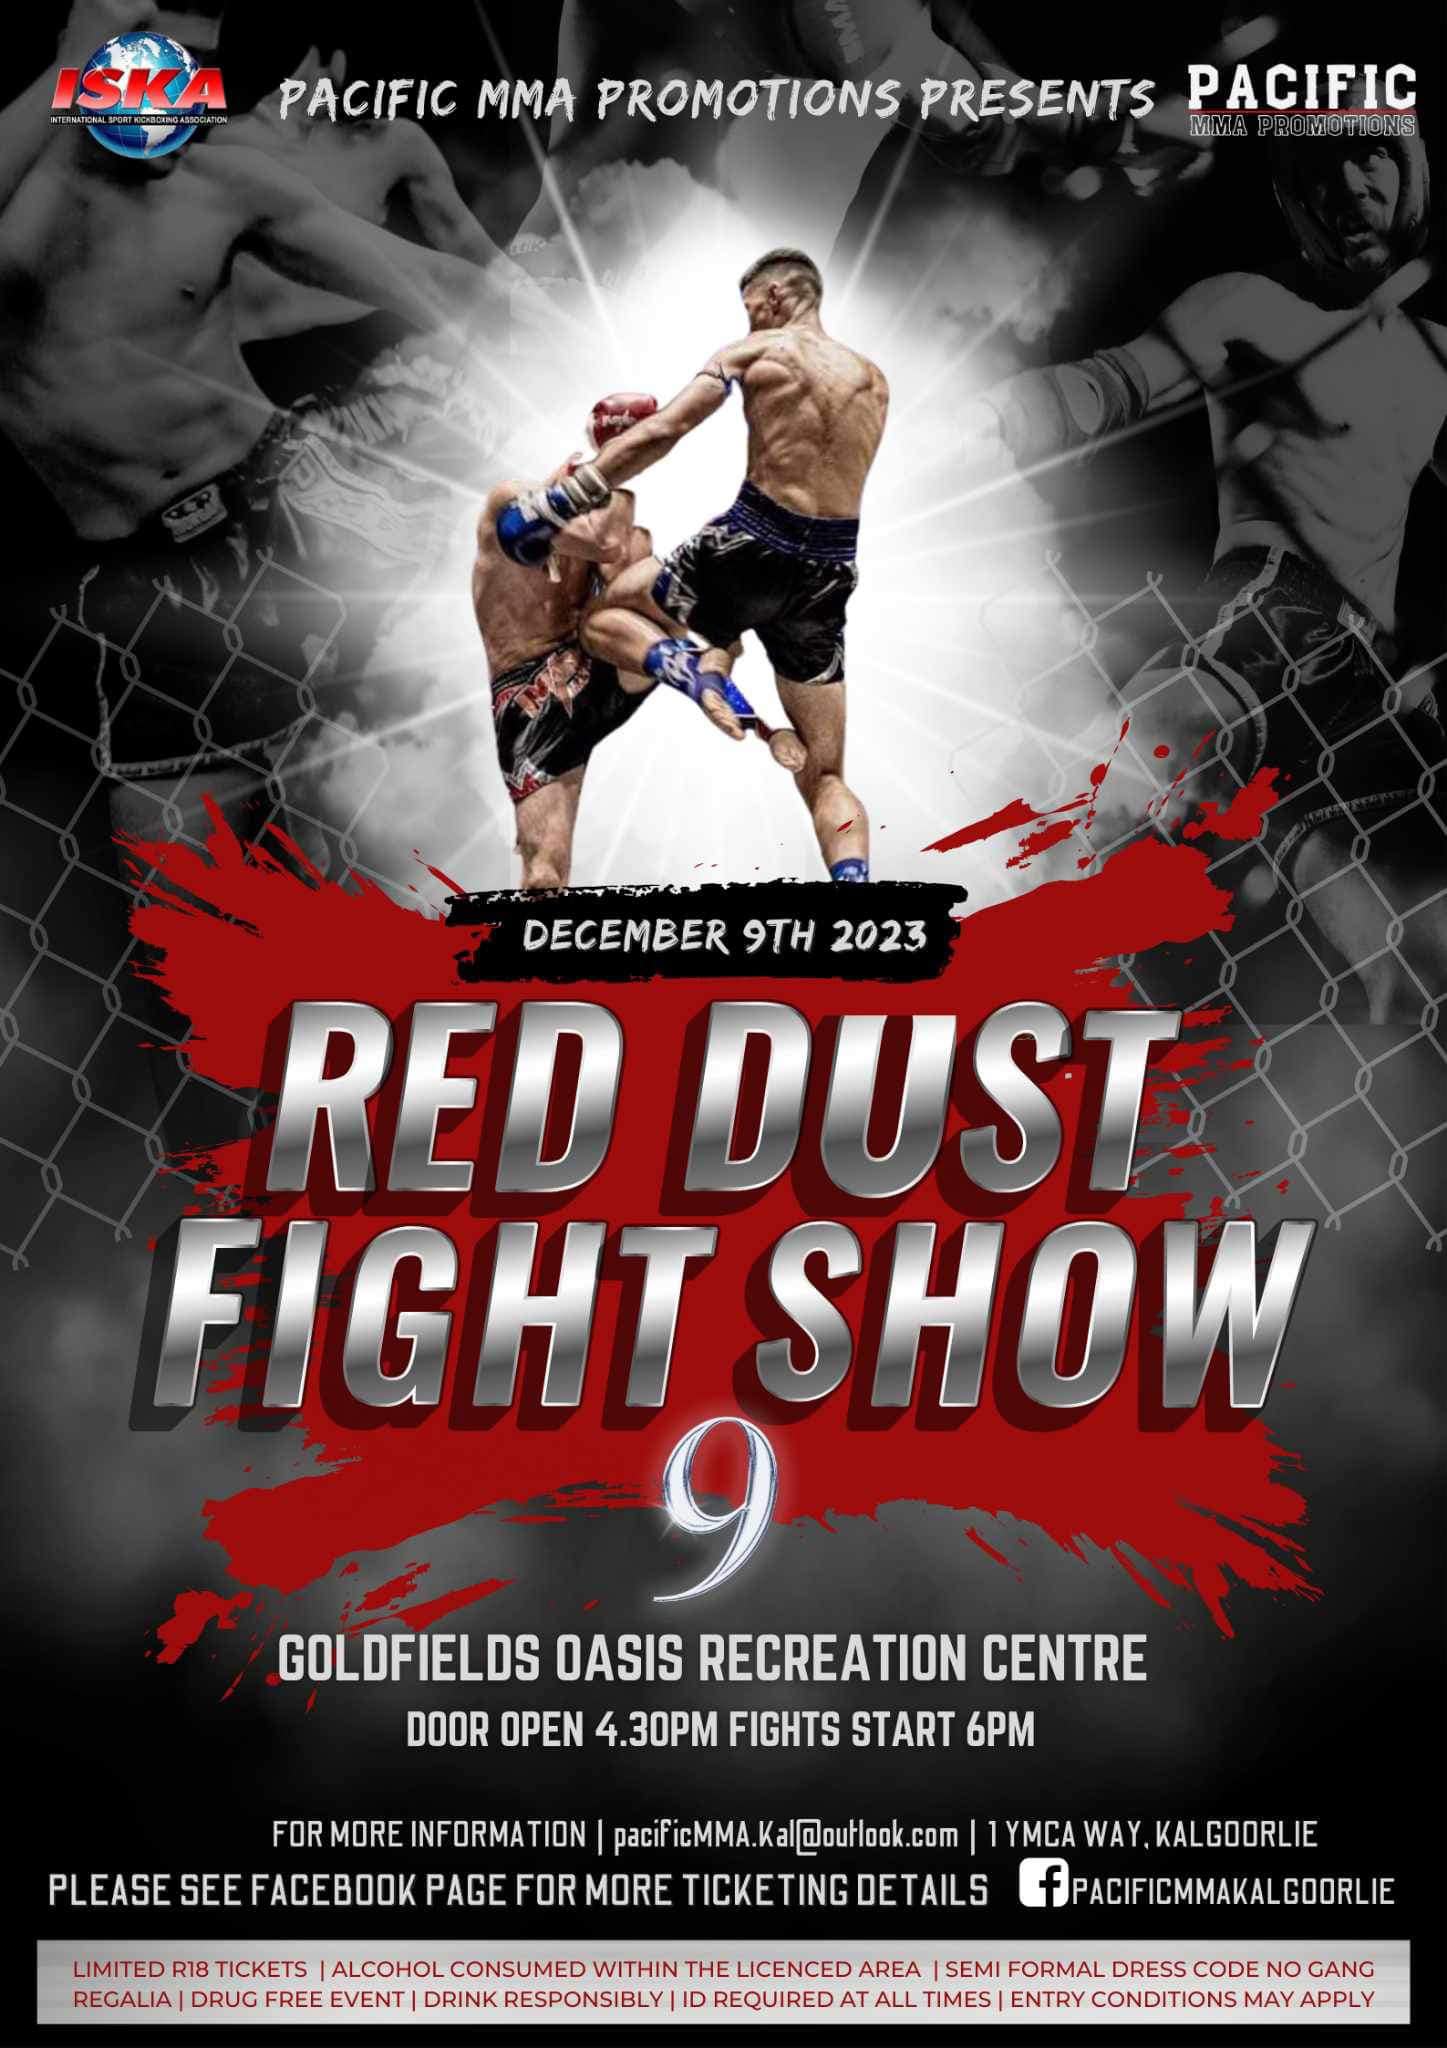 Poster promoting 'Red Dust Fight Show 9'. Goldfields Recreation Centre on 9 December 2023